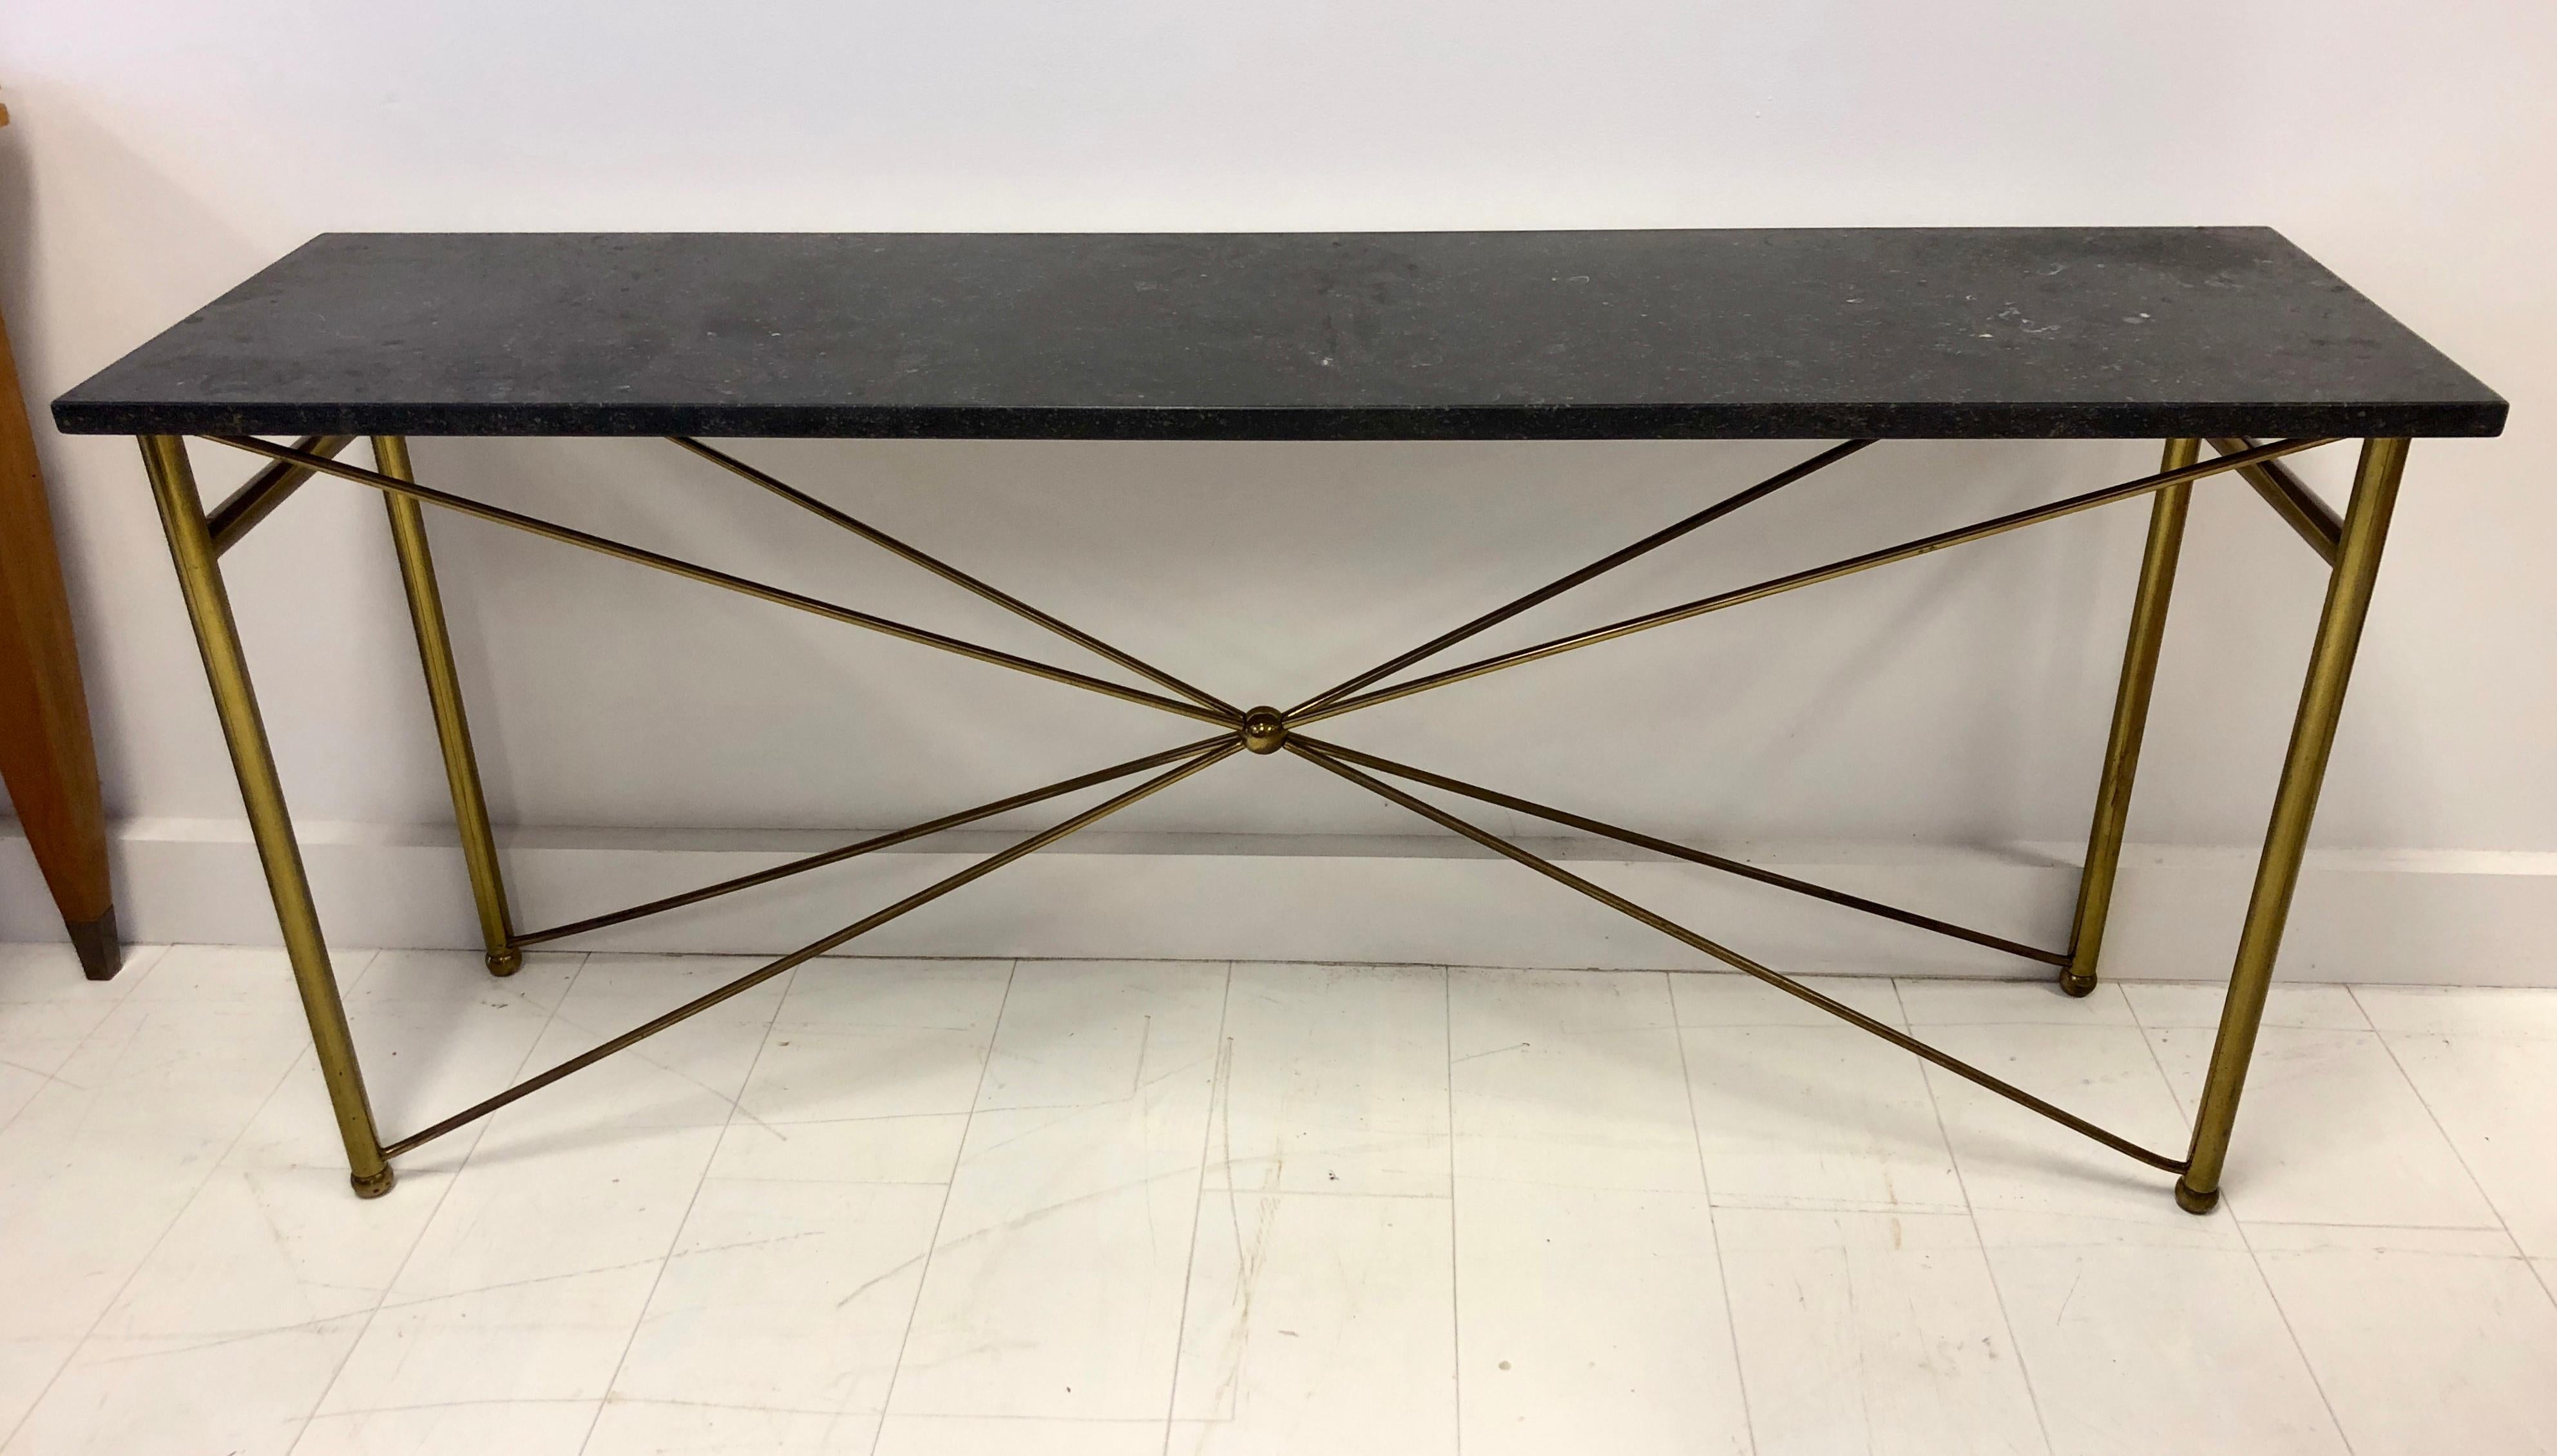 1960s era brass console table with decorative stretchers intersecting in a centred orb. Marble top is 1